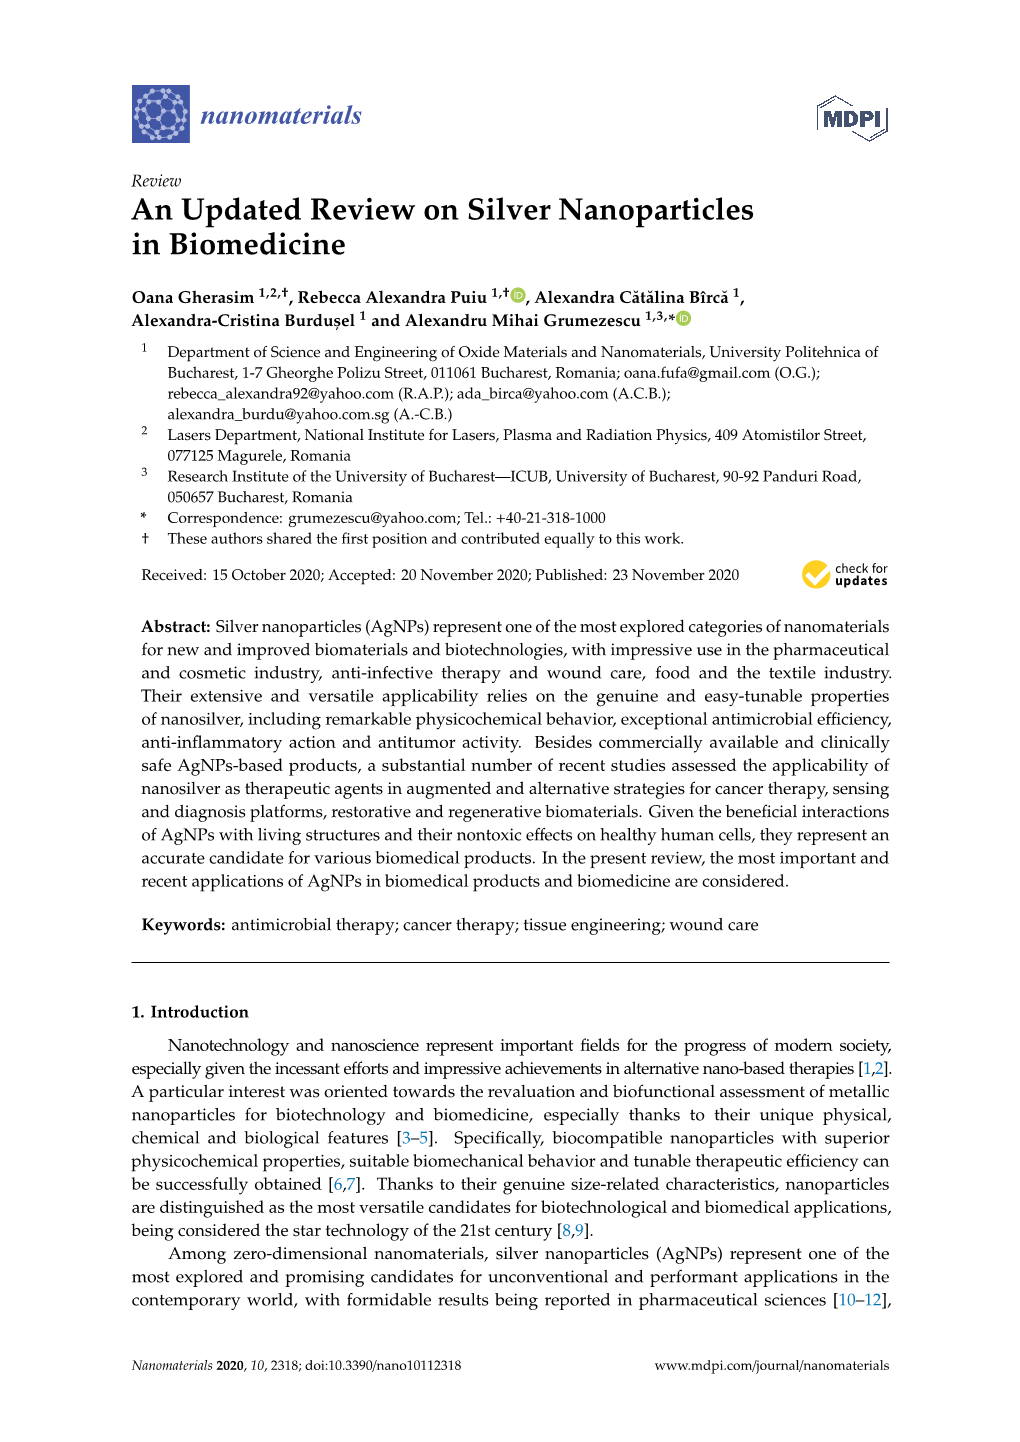 An Updated Review on Silver Nanoparticles in Biomedicine